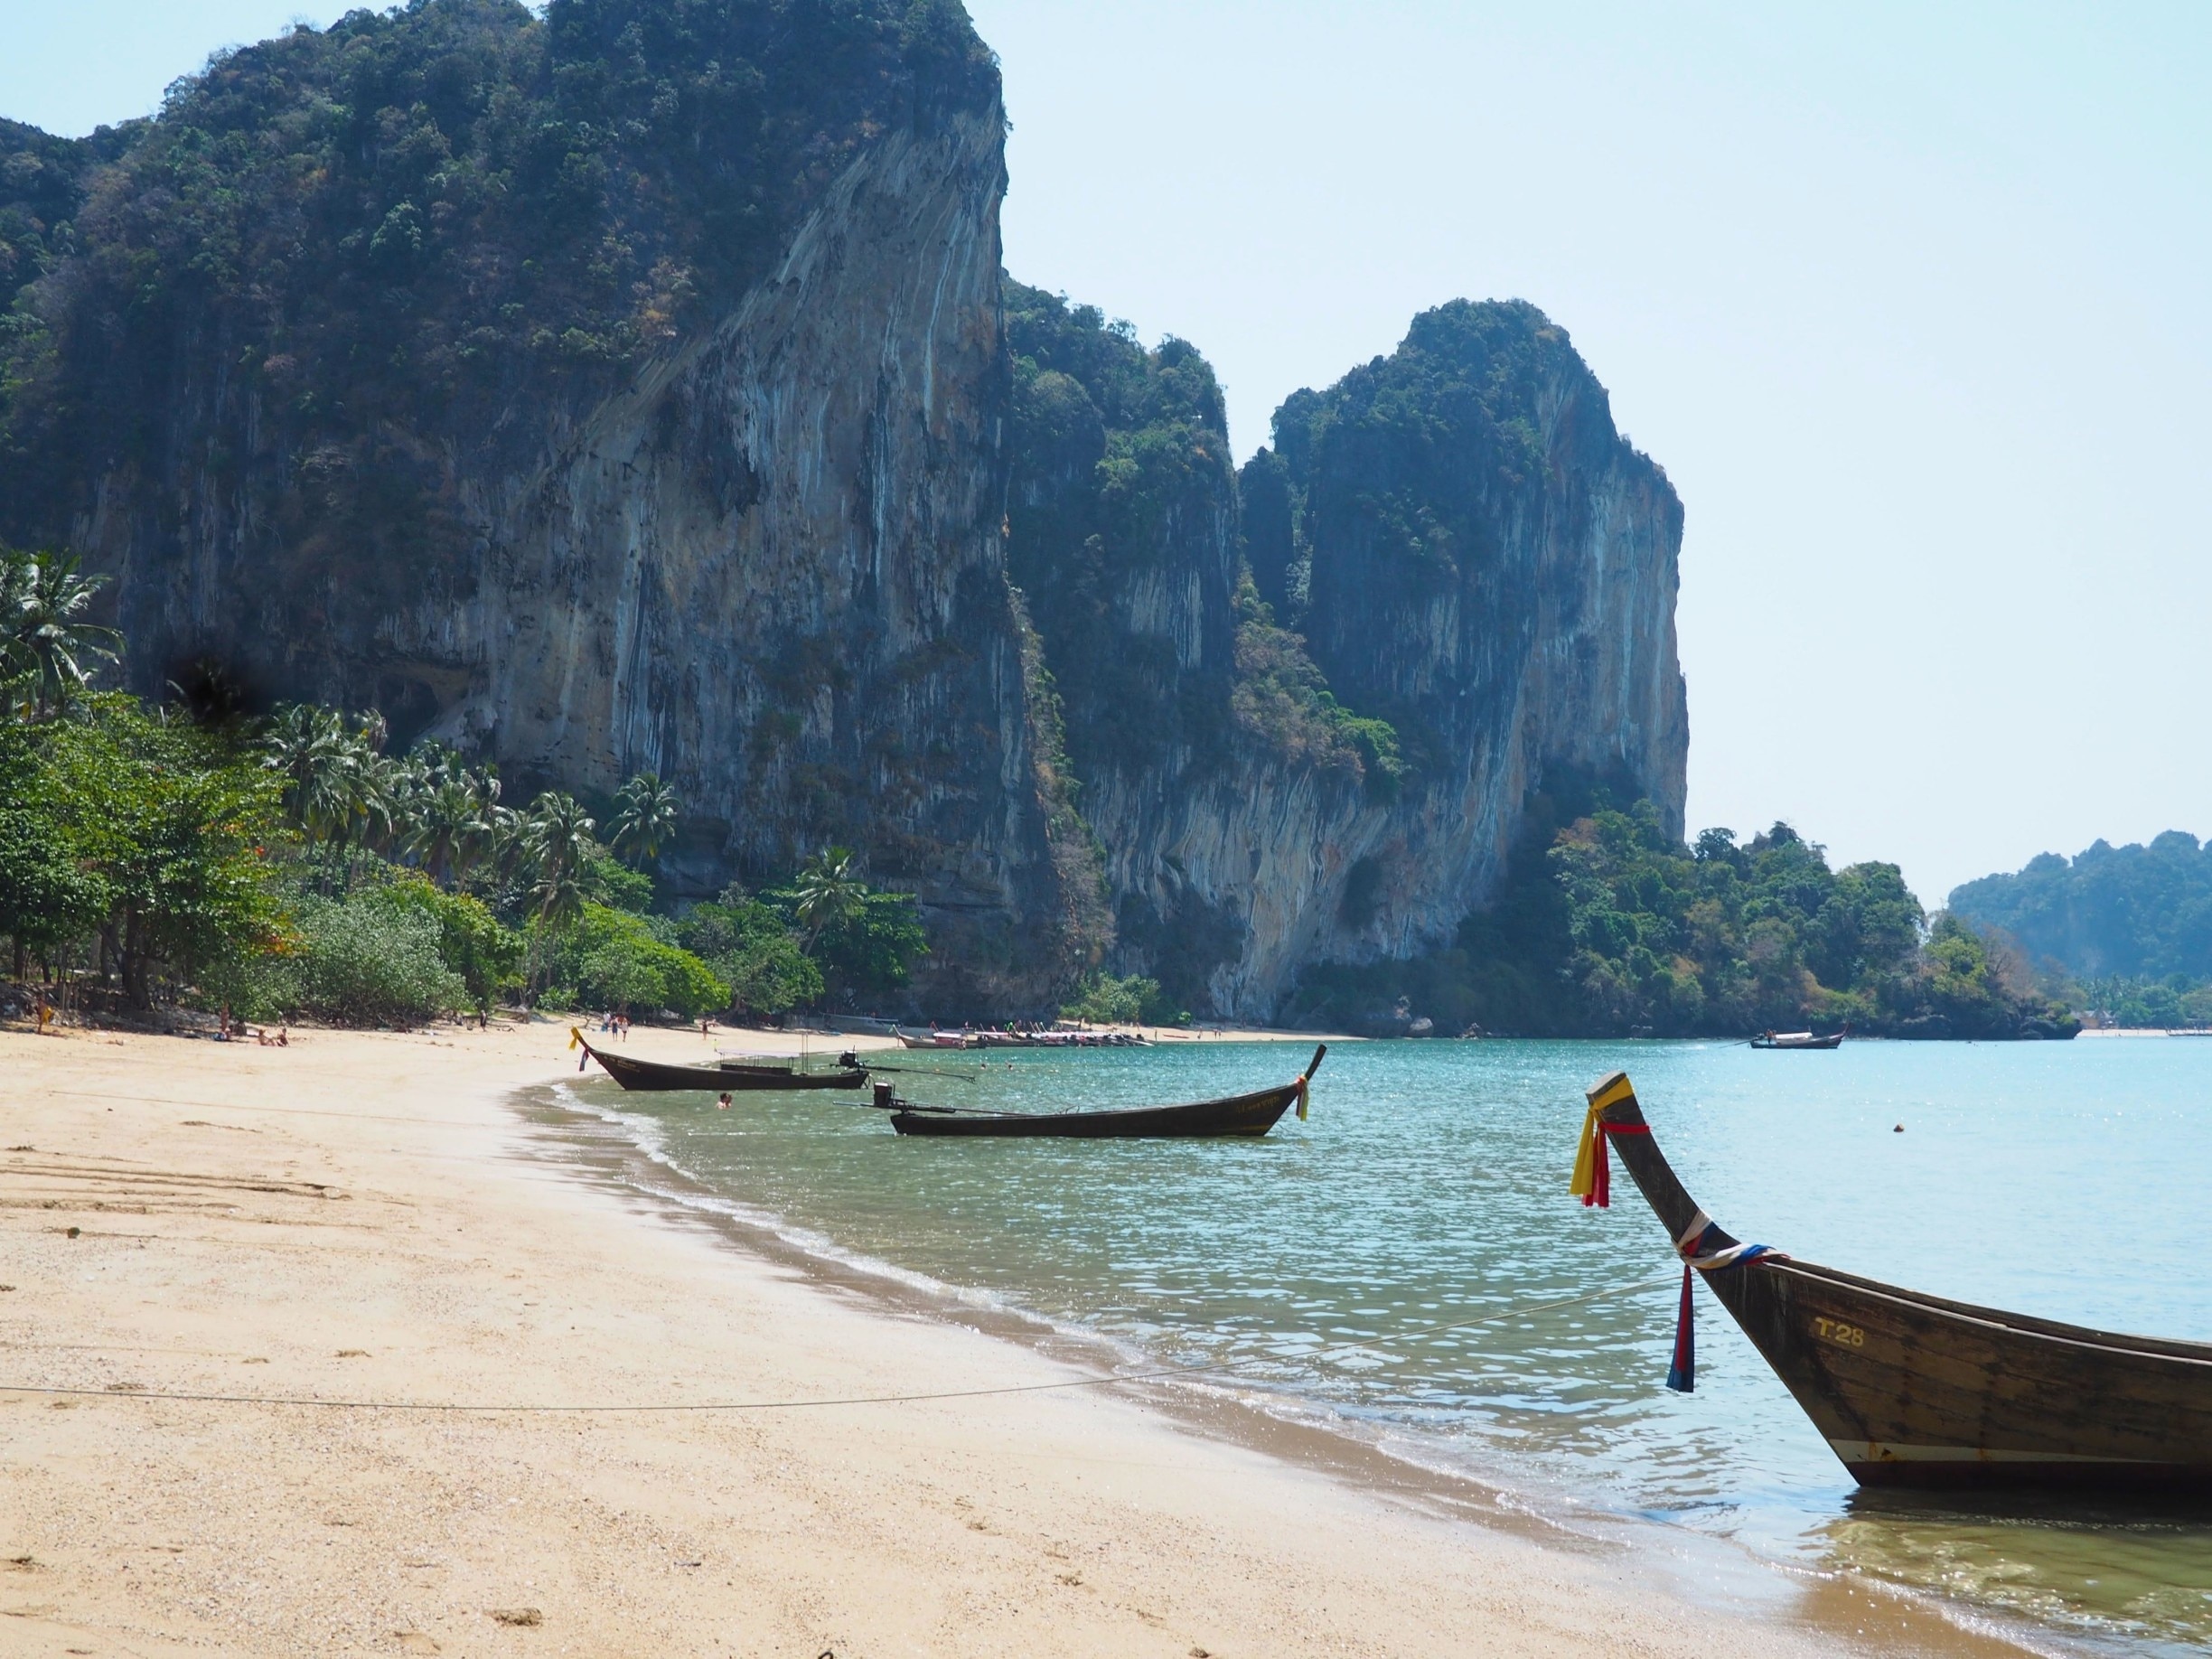 A 20 minute clamber up and over rocks (rope-assisted) from Railay West beach will take you to this gem. Quieter than the other beaches around Railay, and with coarser sand, it's nevertheless well worth making the effort. 

Read more at

http://www.aboveusonlyskies.com/reflections-on-railay/
